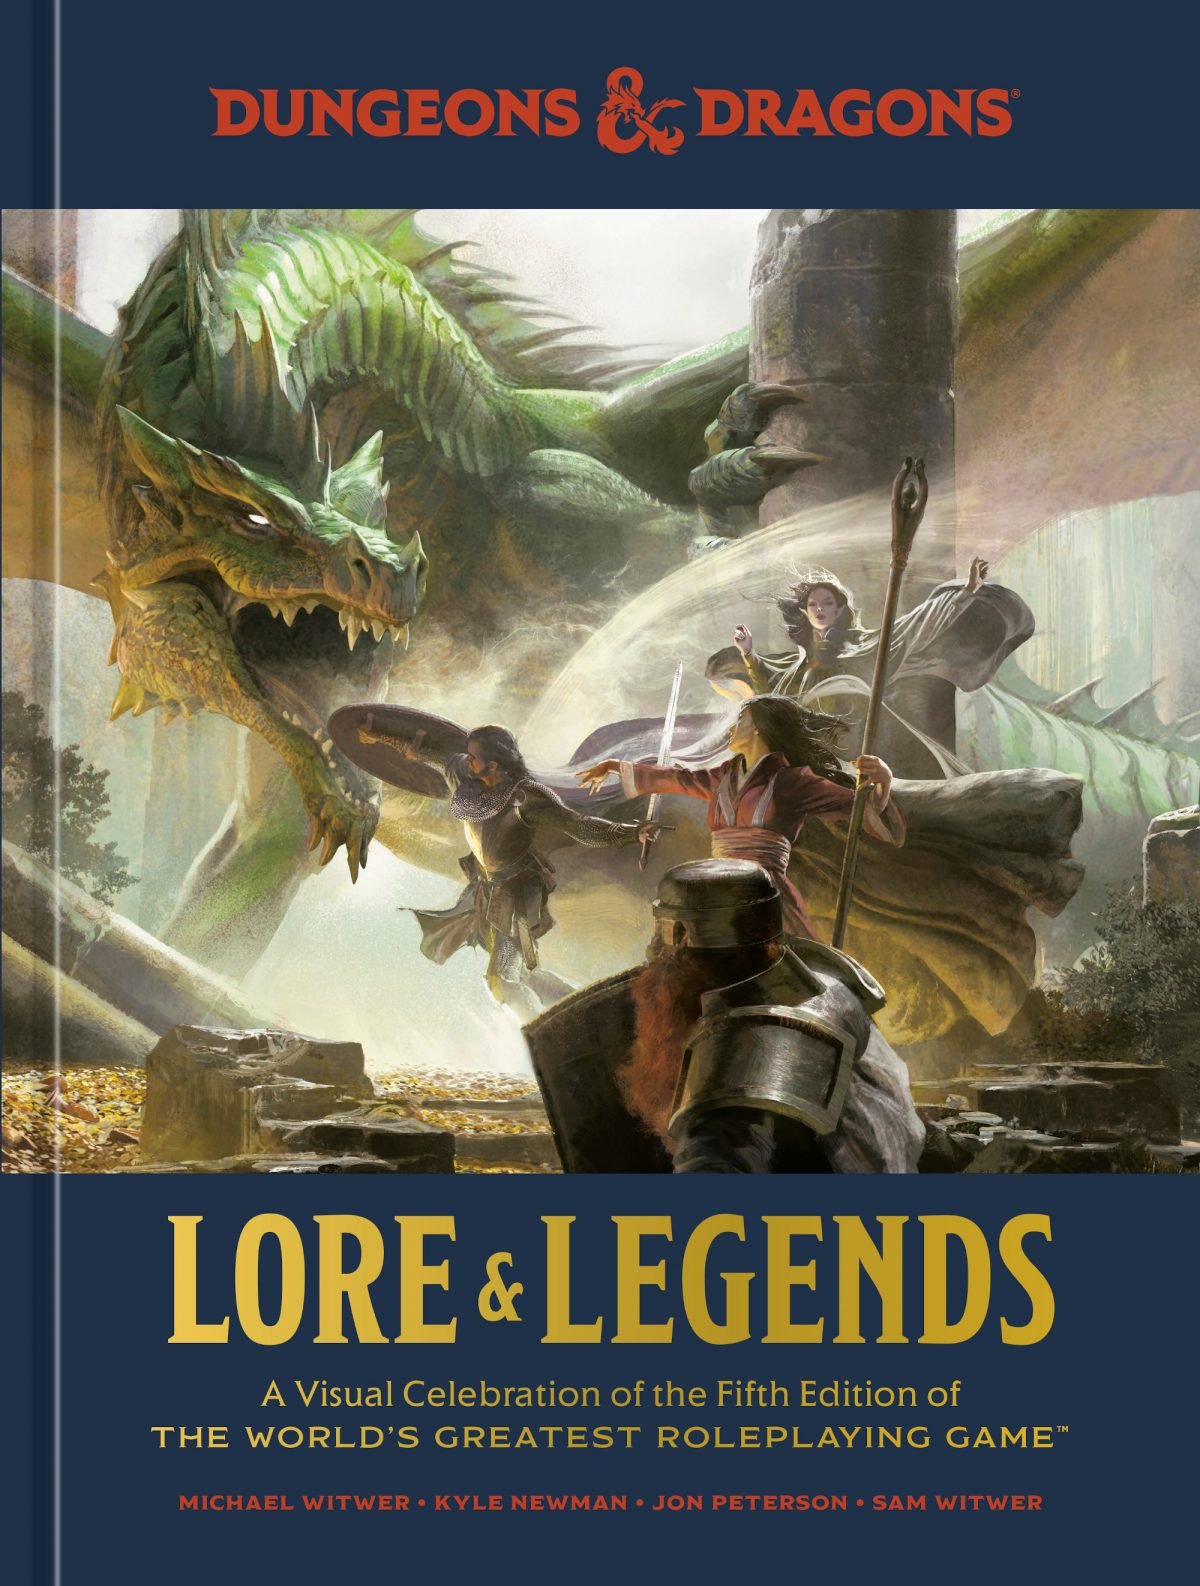 Heroes fight a dragon on the cover of Lore & Legends: A Visual Celebration of the Fifth Edition of the World's Greatest Roleplaying Game